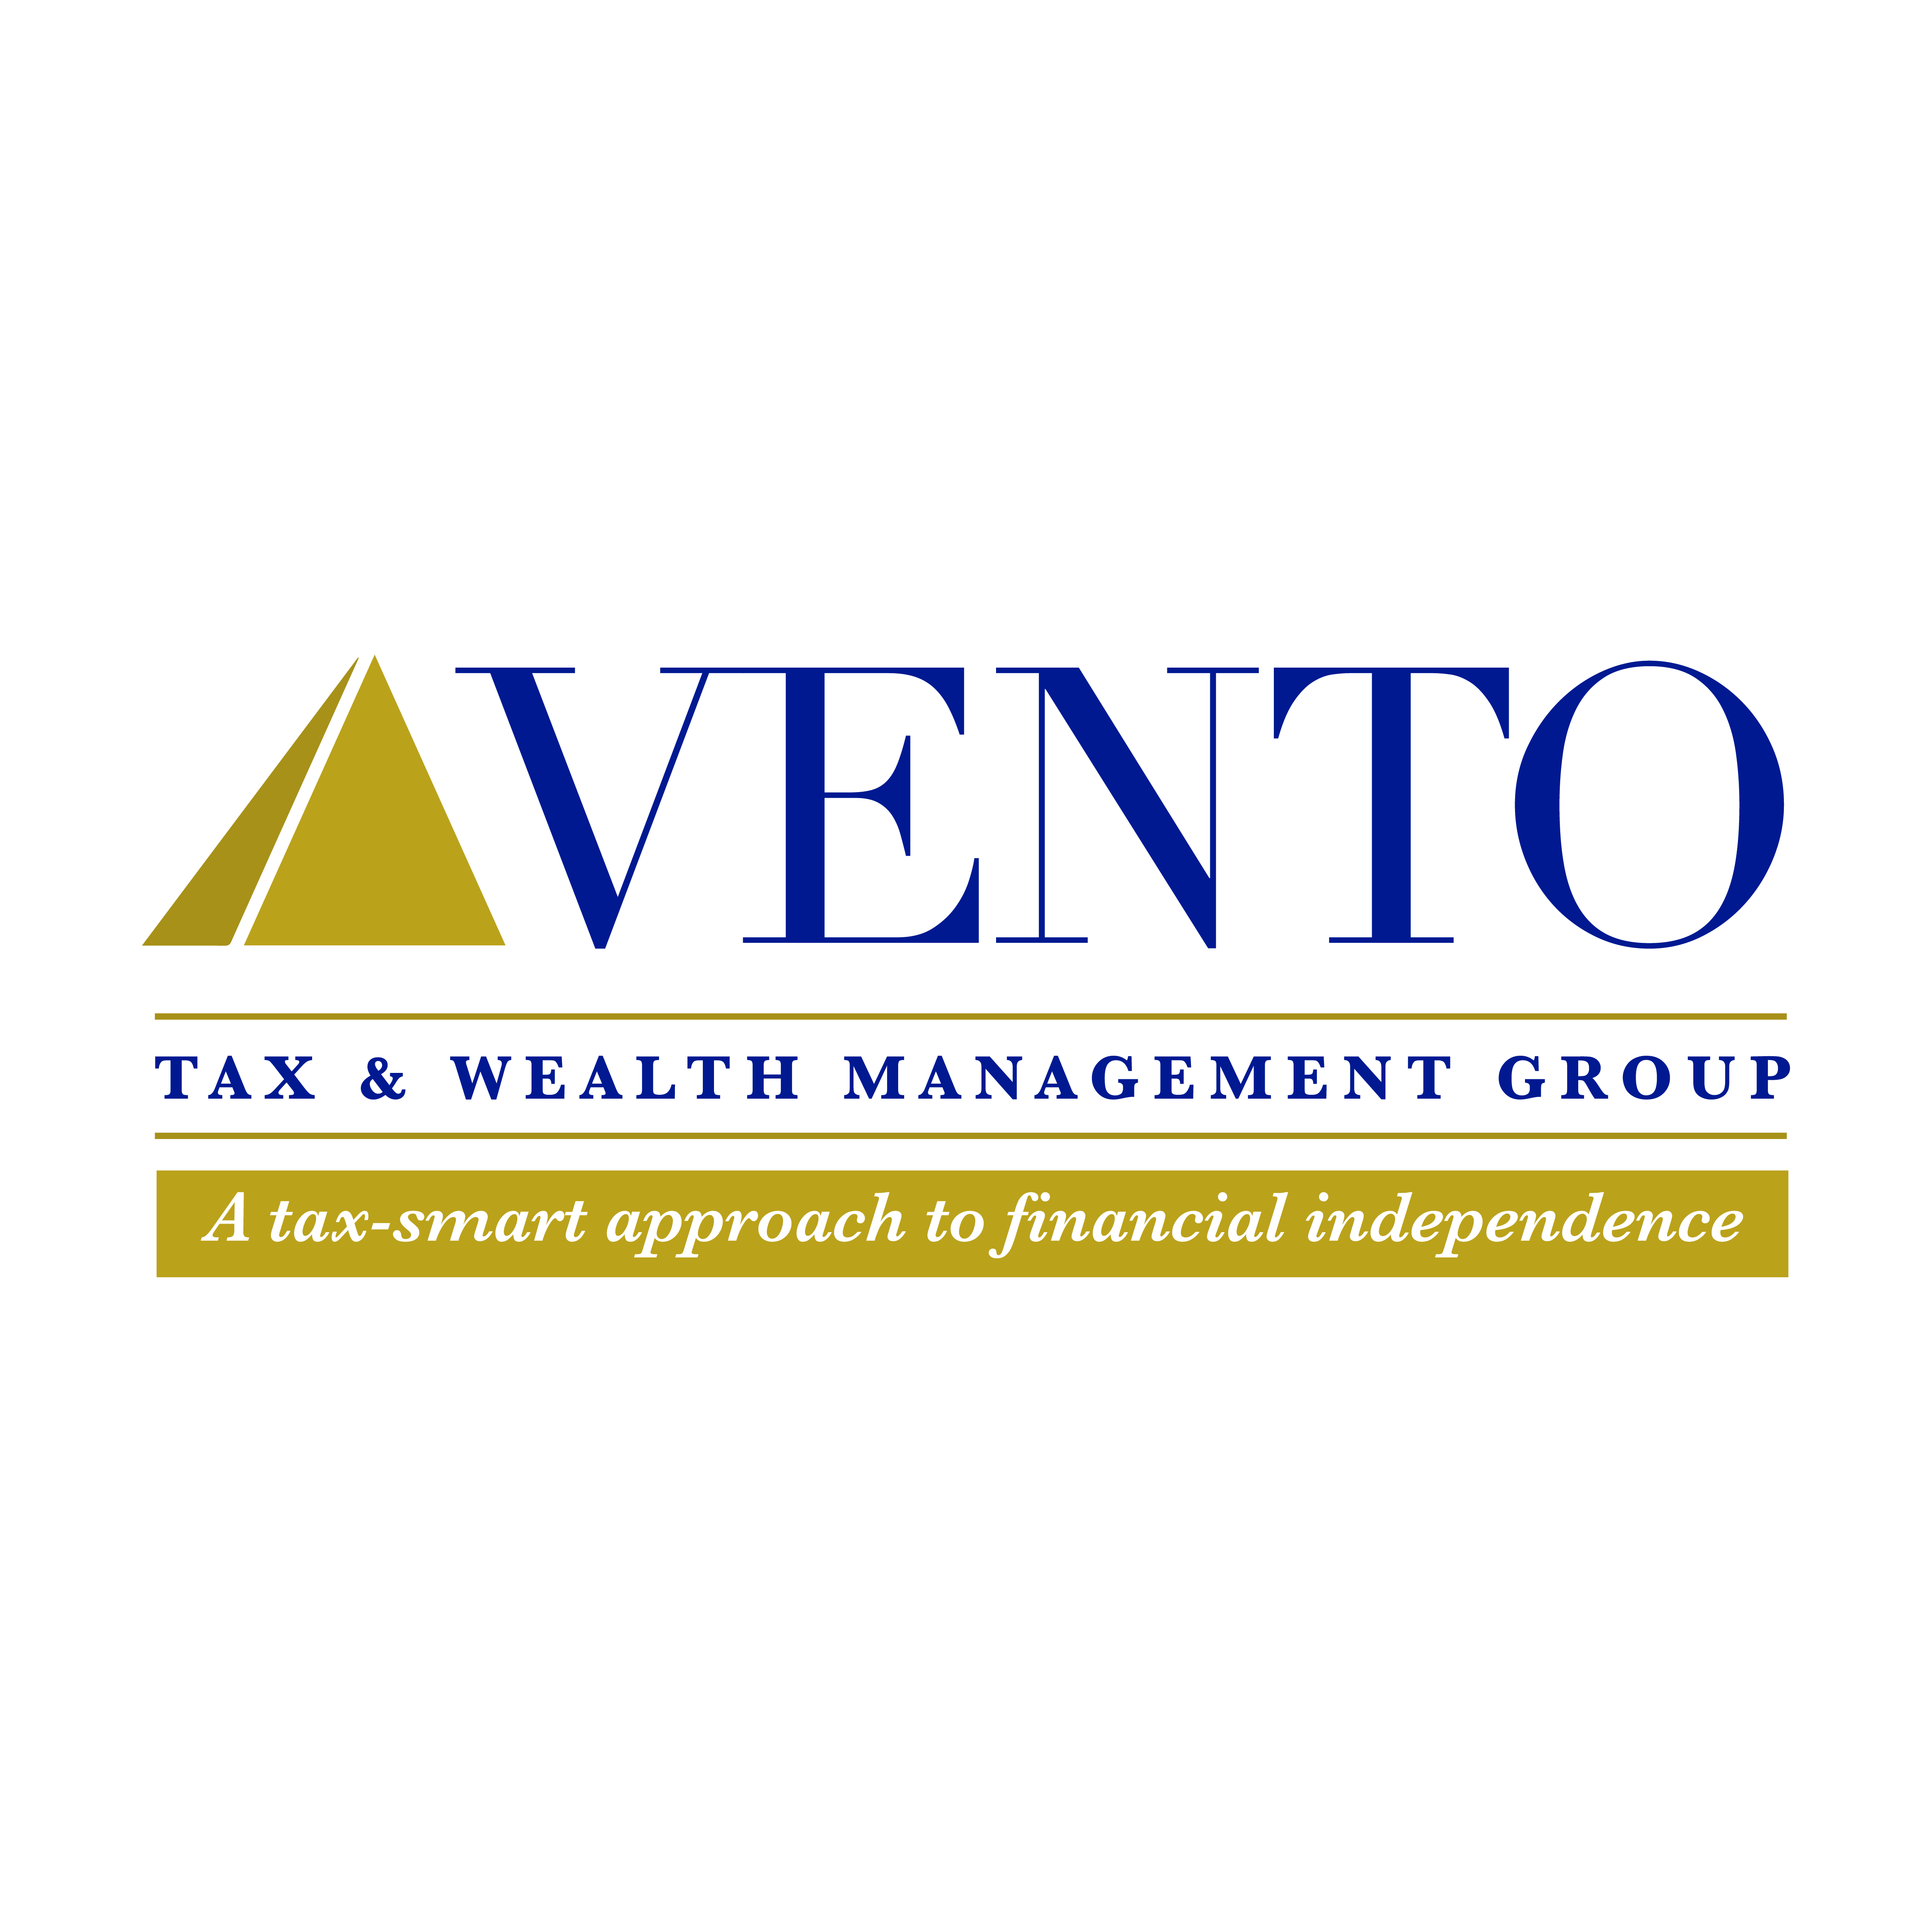 Vento Tax & Wealth Management Group